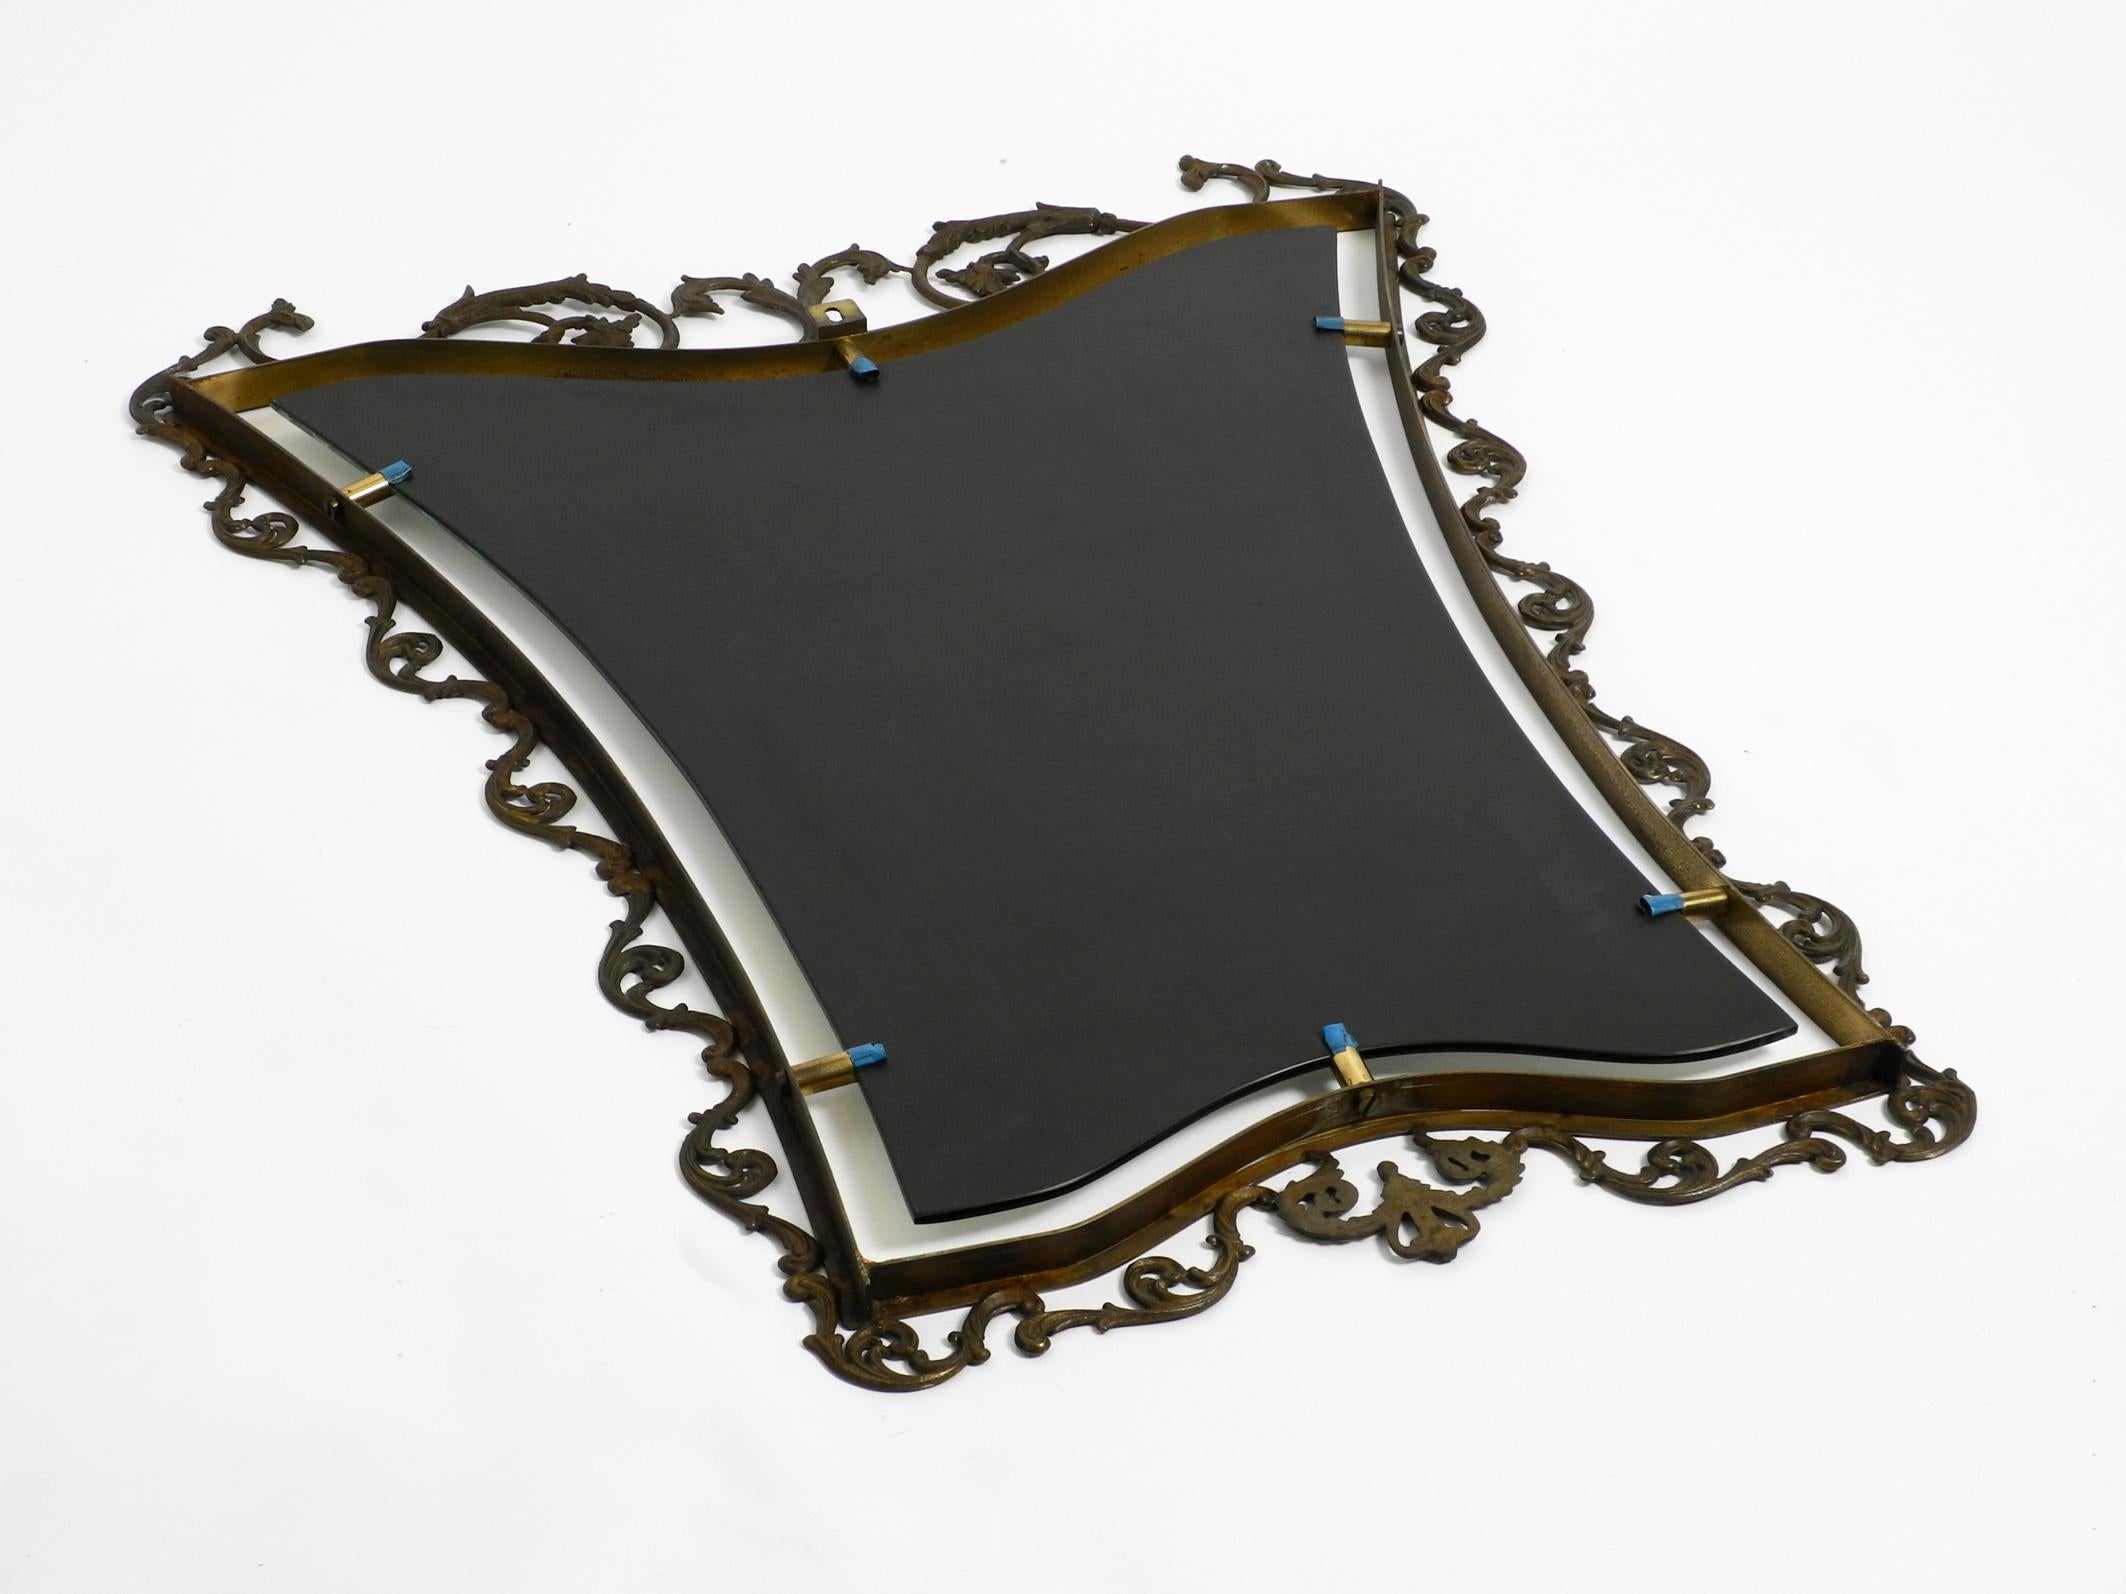 Extraordinary Large, Heavy Italian Mid Century Wall Mirror with an Ornate Brass For Sale 7